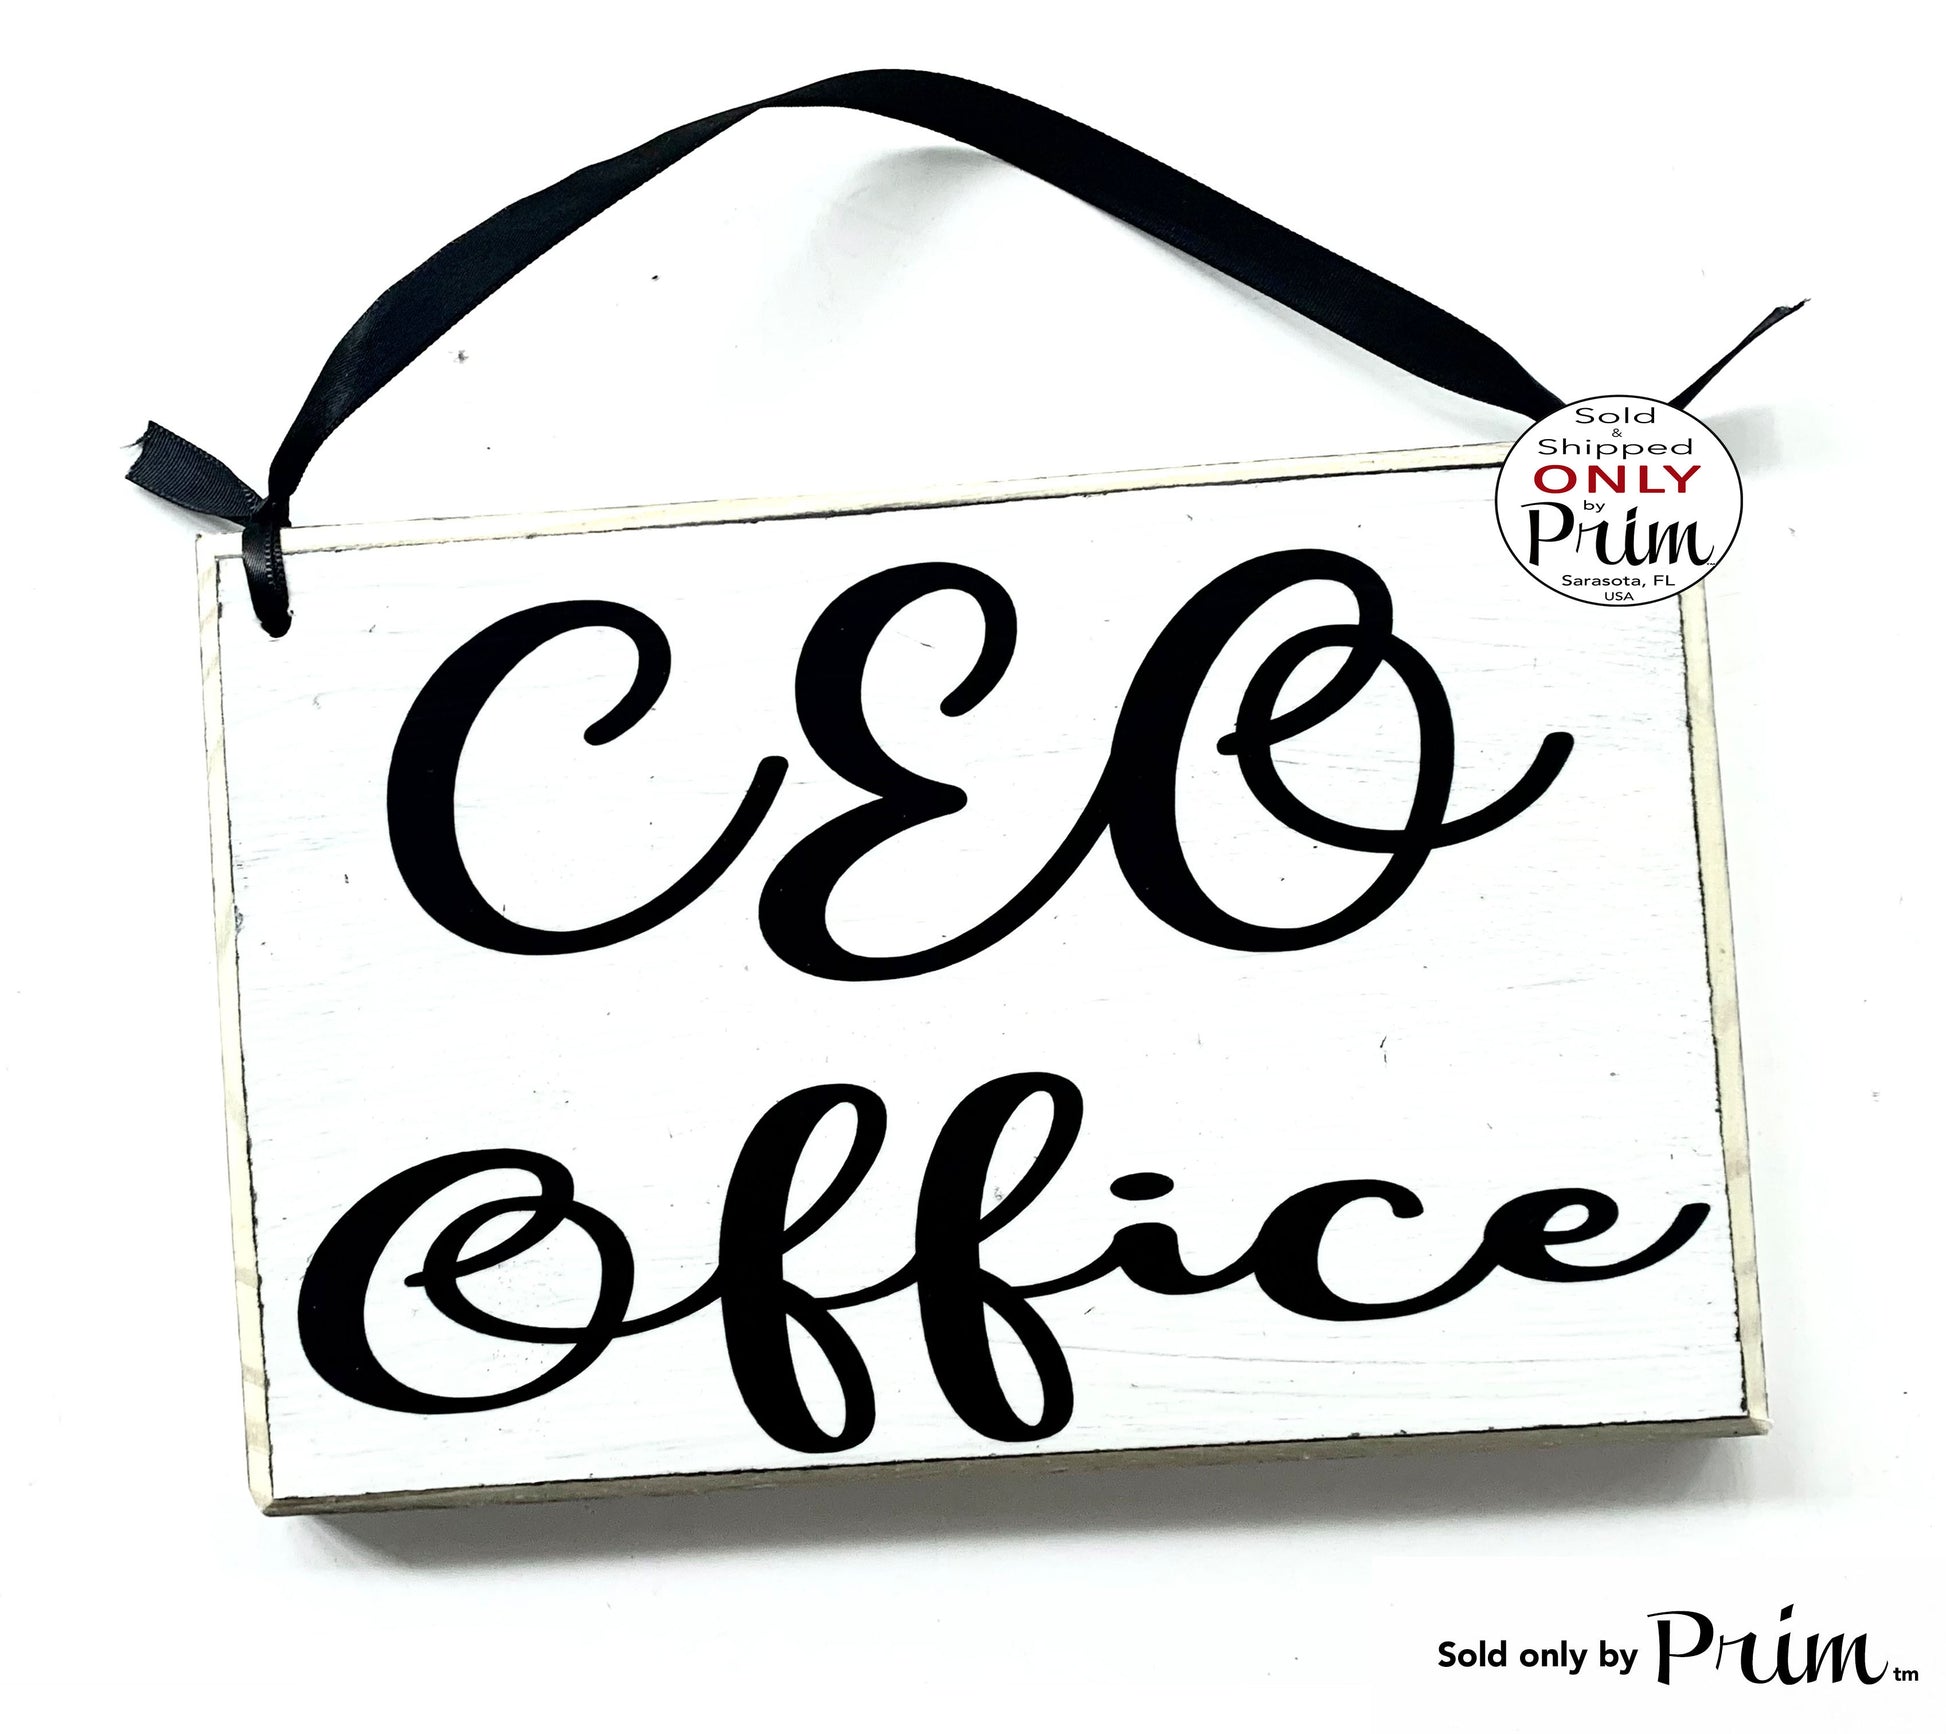 8x6 CEO Office Custom Wood Sign Executive Suite Custom Wood Sign Manager Supervisor Boss Space Business Management Leadership Door Plaque Designs by Prim